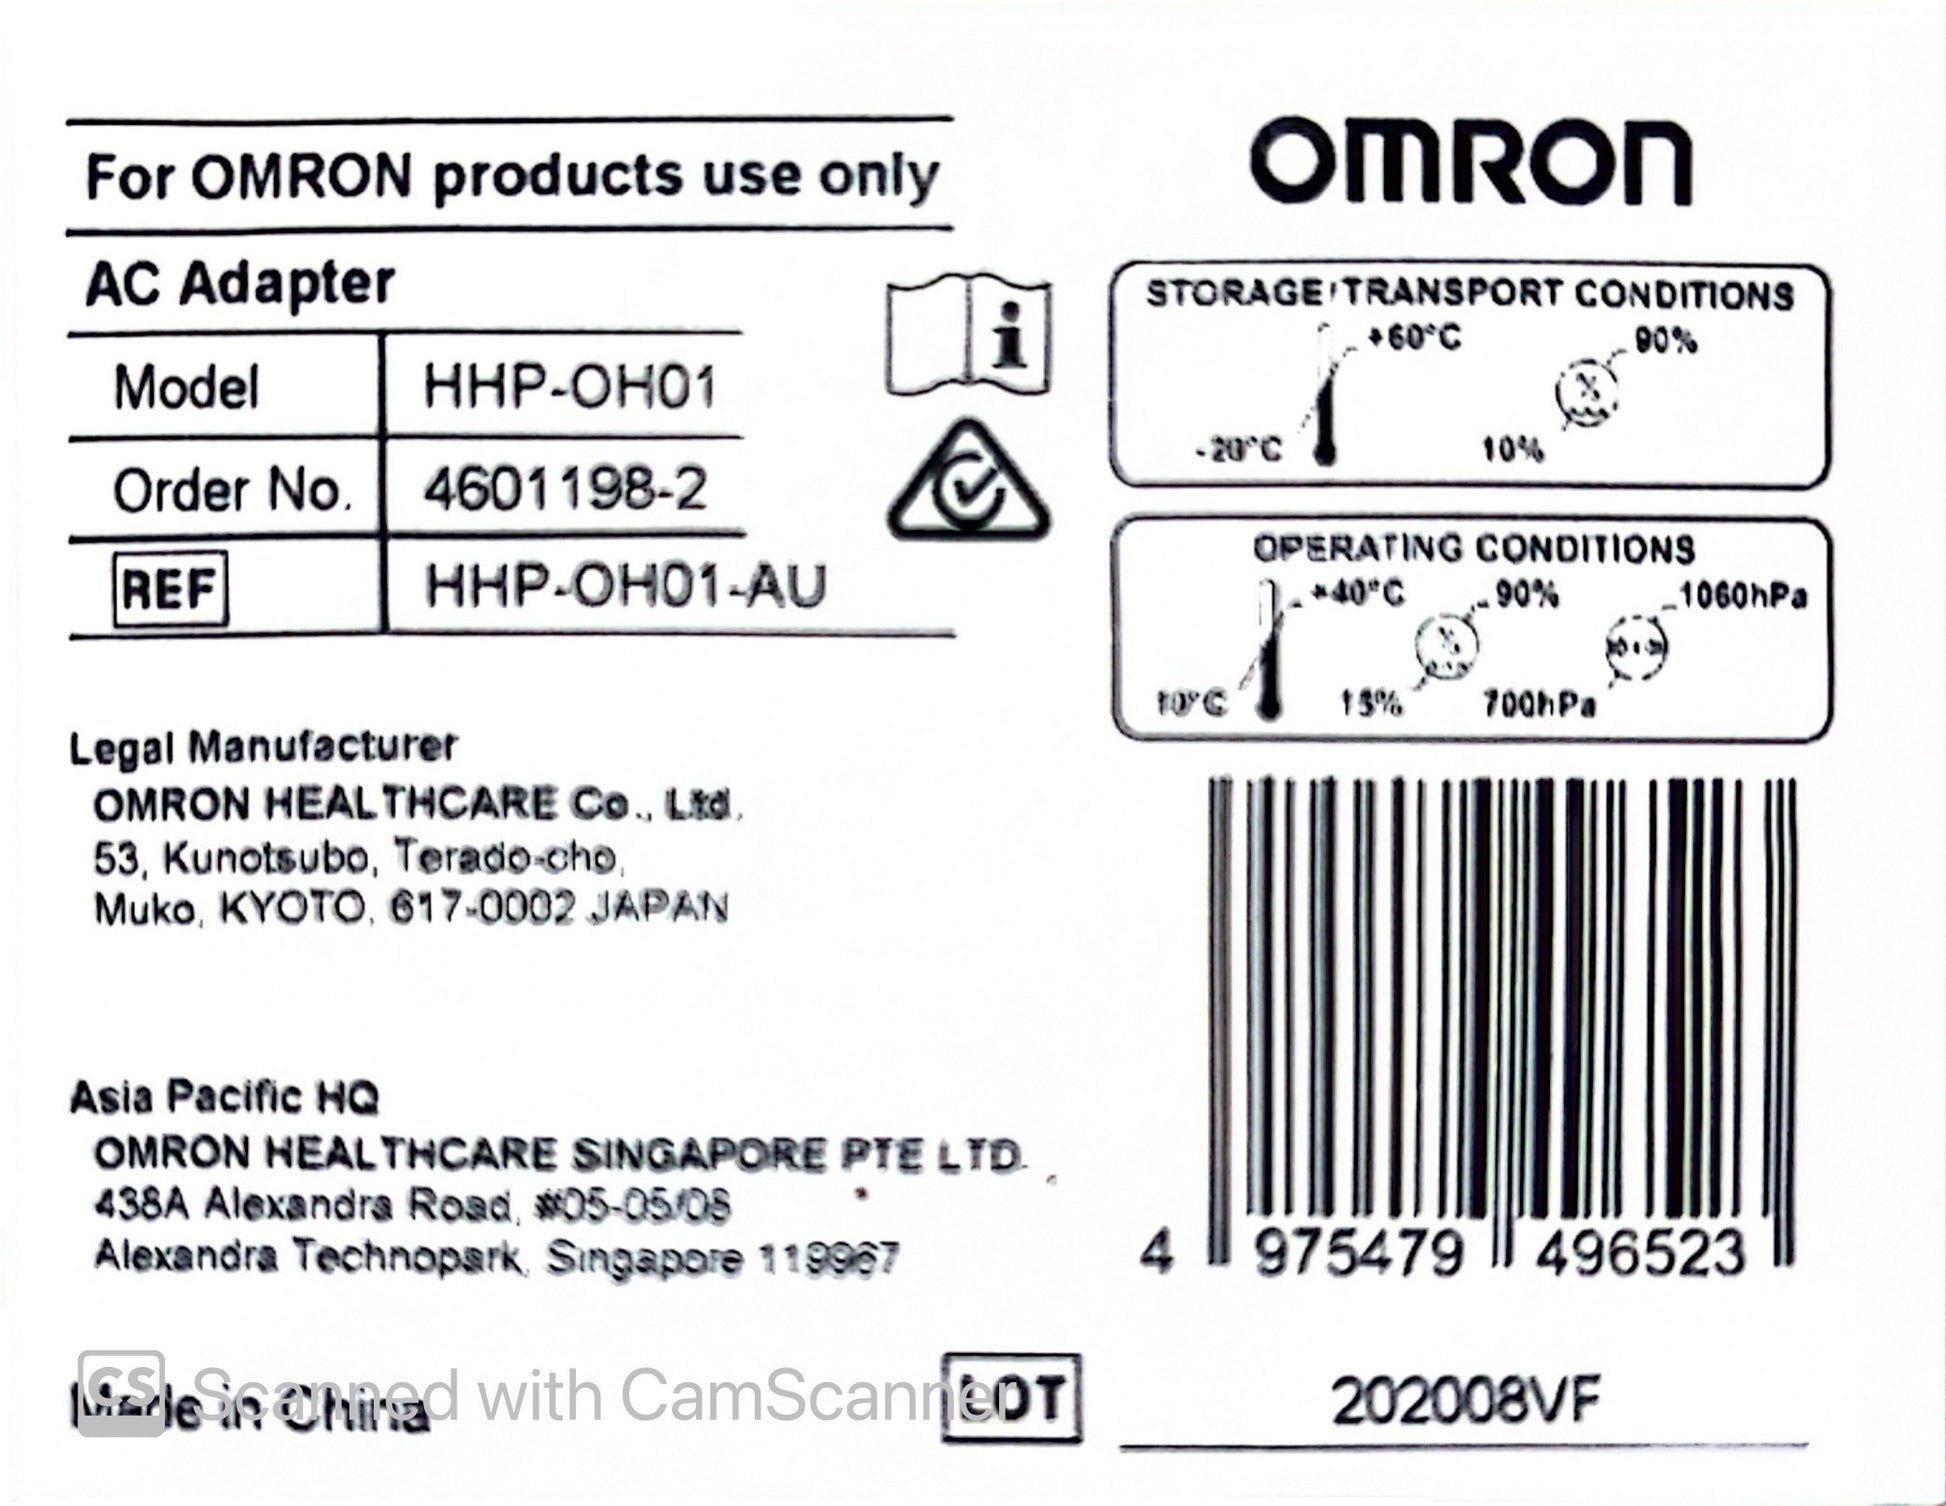 Omron AC adapter for Omron Blood Pressure Monitors